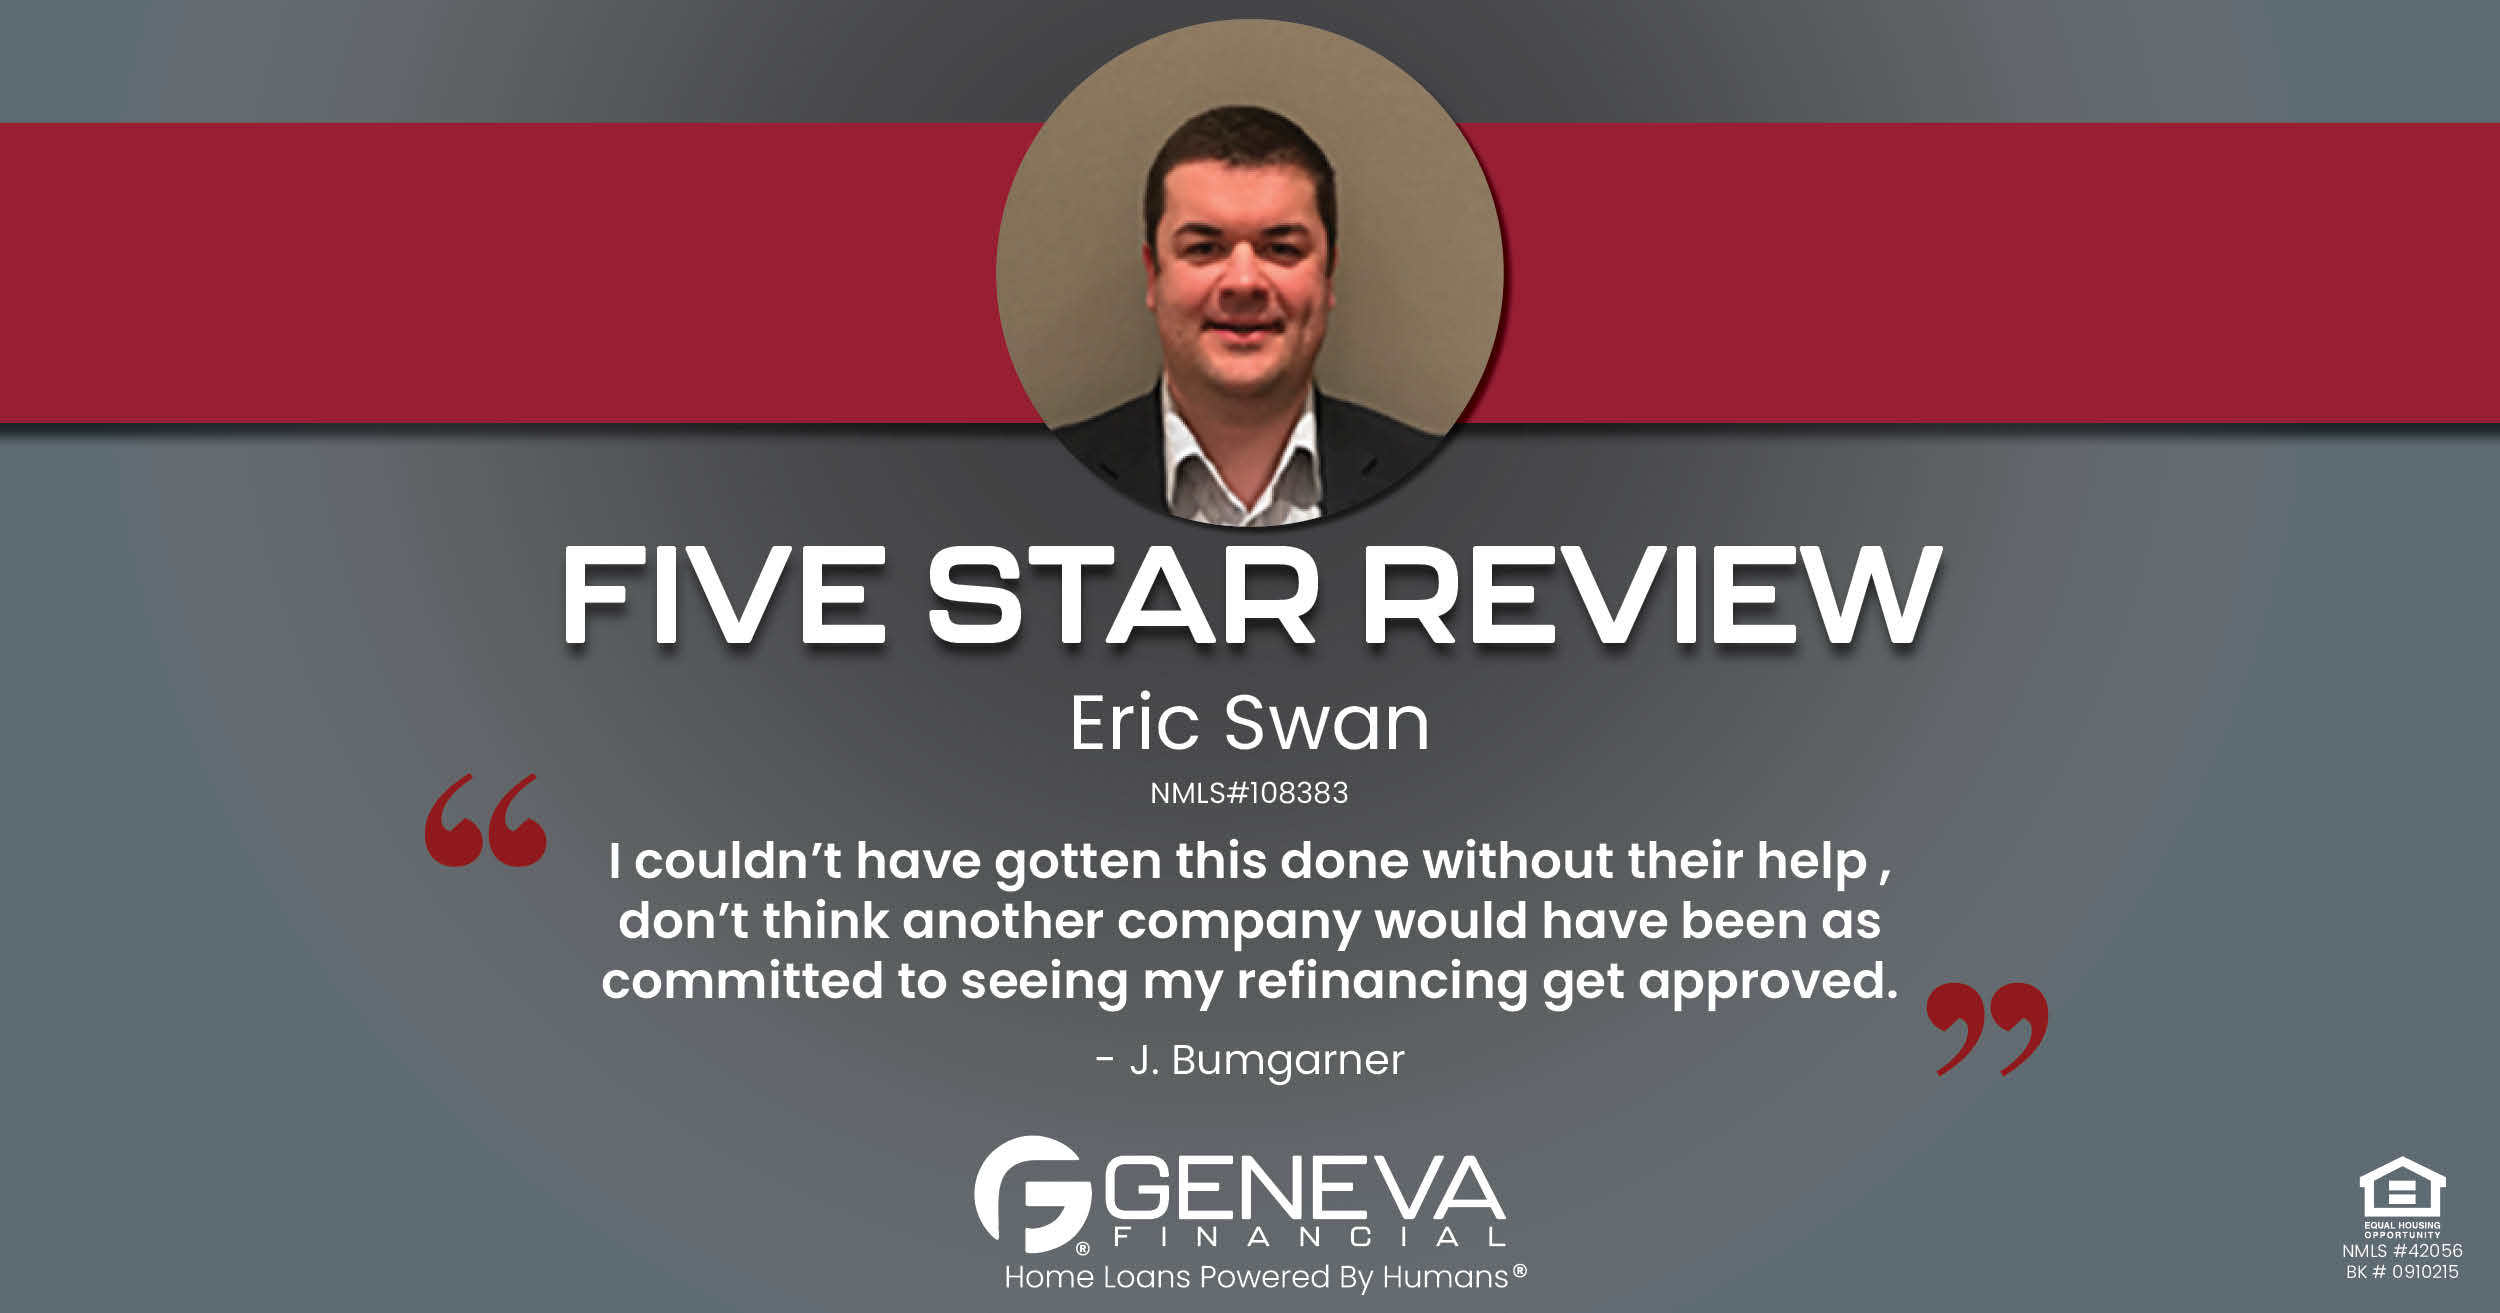 5 Star Review for Eric Swan, Licensed Mortgage Loan Officer with Geneva Financial, High Ridge, Missouri – Home Loans Powered by Humans®